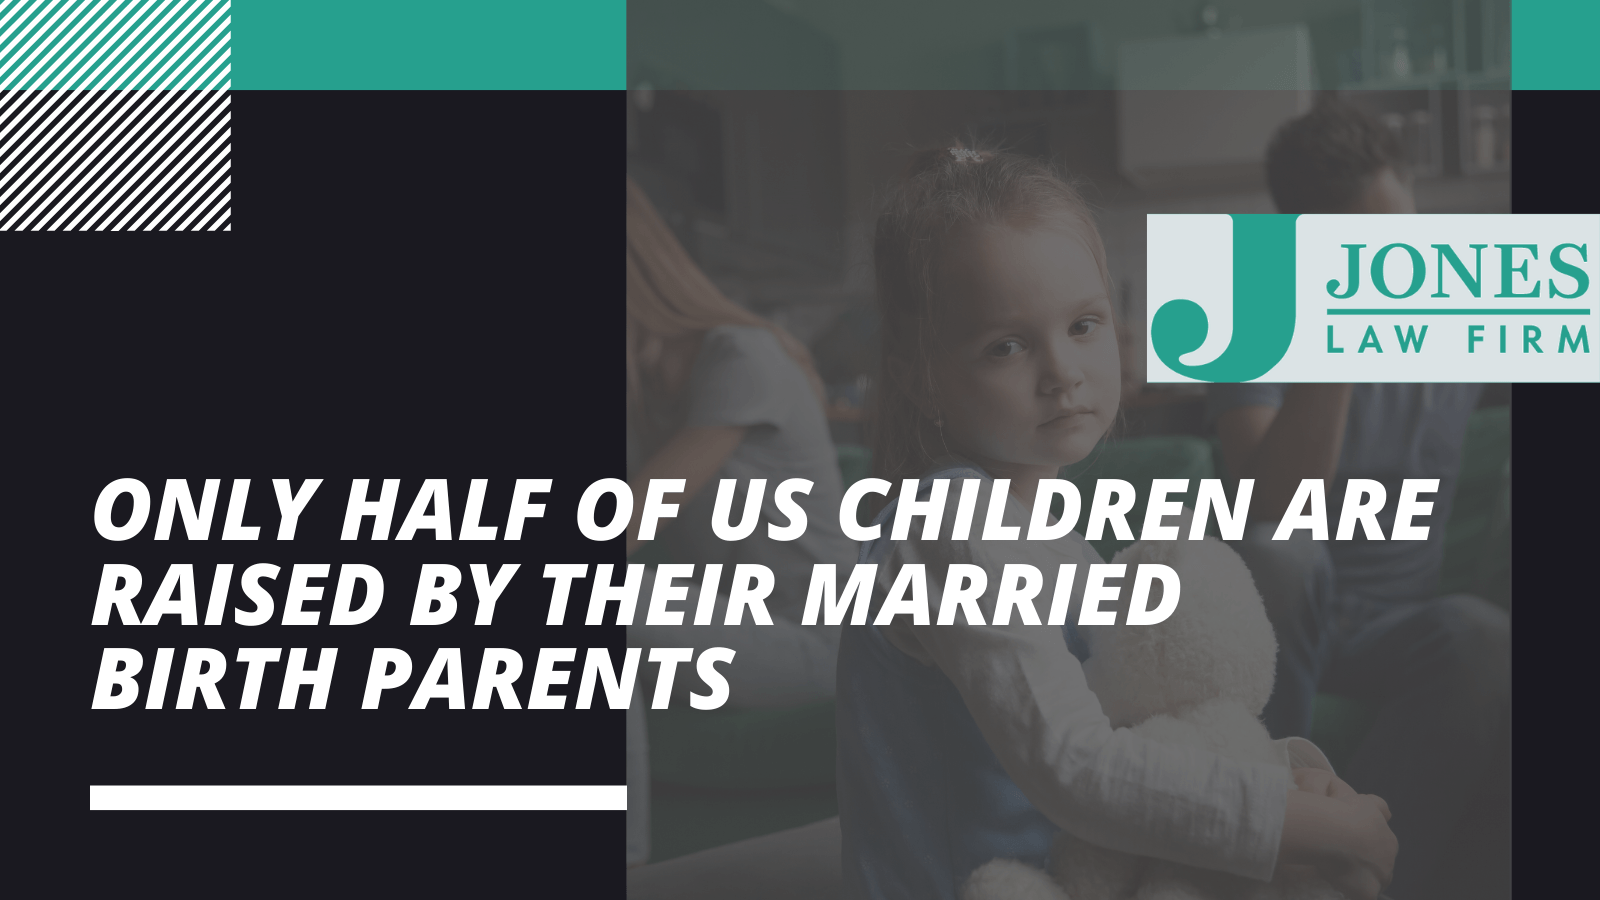 Only half of US children are raised by their married birth parents - Jones law firm - Alexandria louisiana